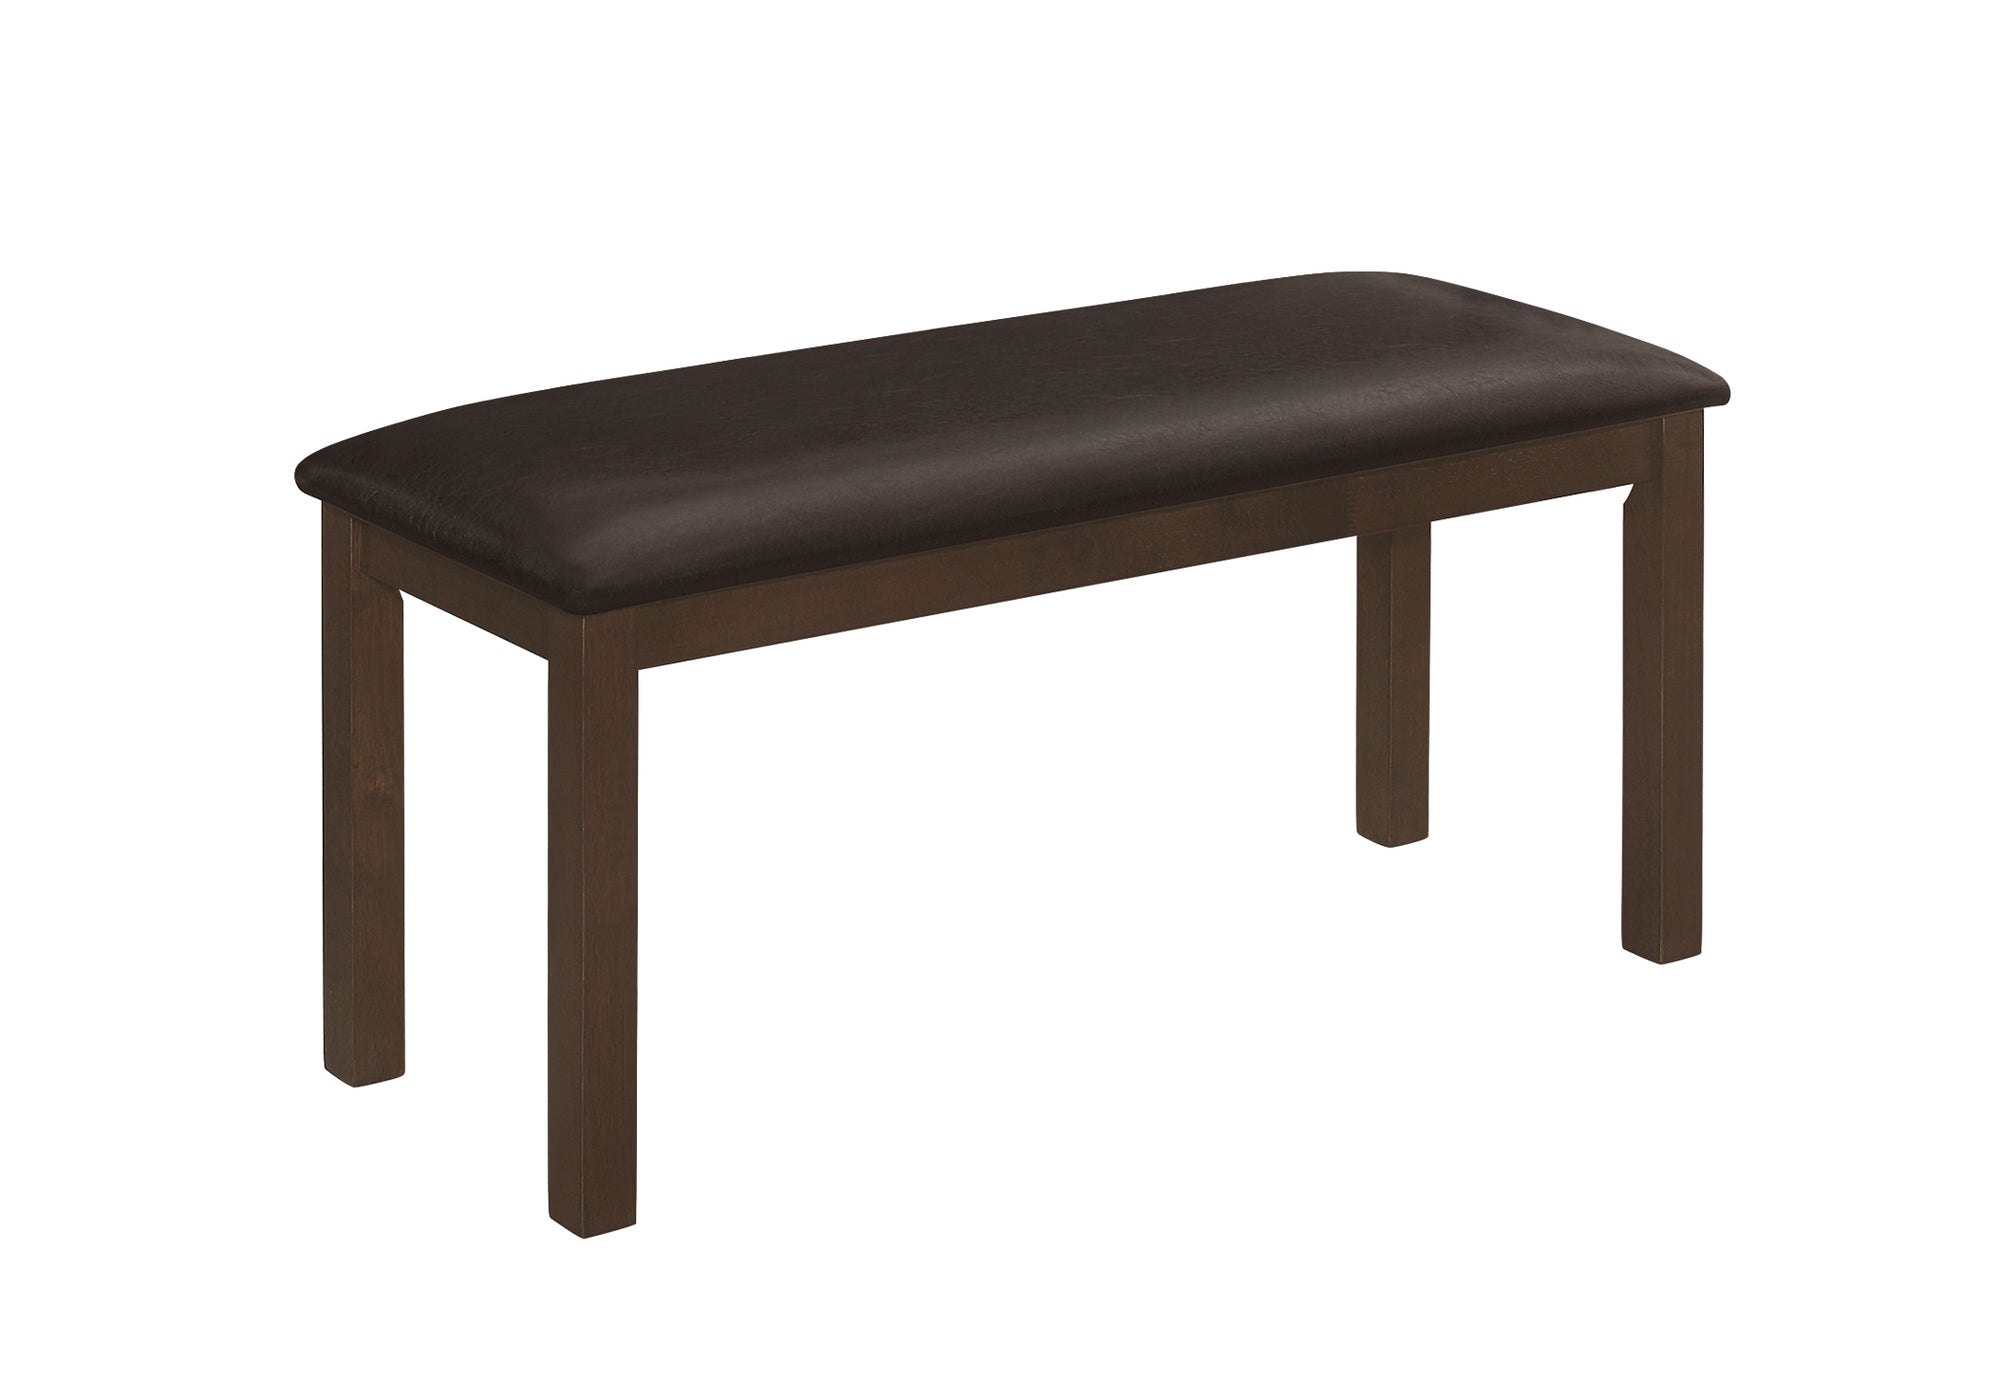 MN-171305    Bench, 42" Rectangular, Wood, Upholstered, Dining Room, Kitchen, Entryway, Brown, Transitional